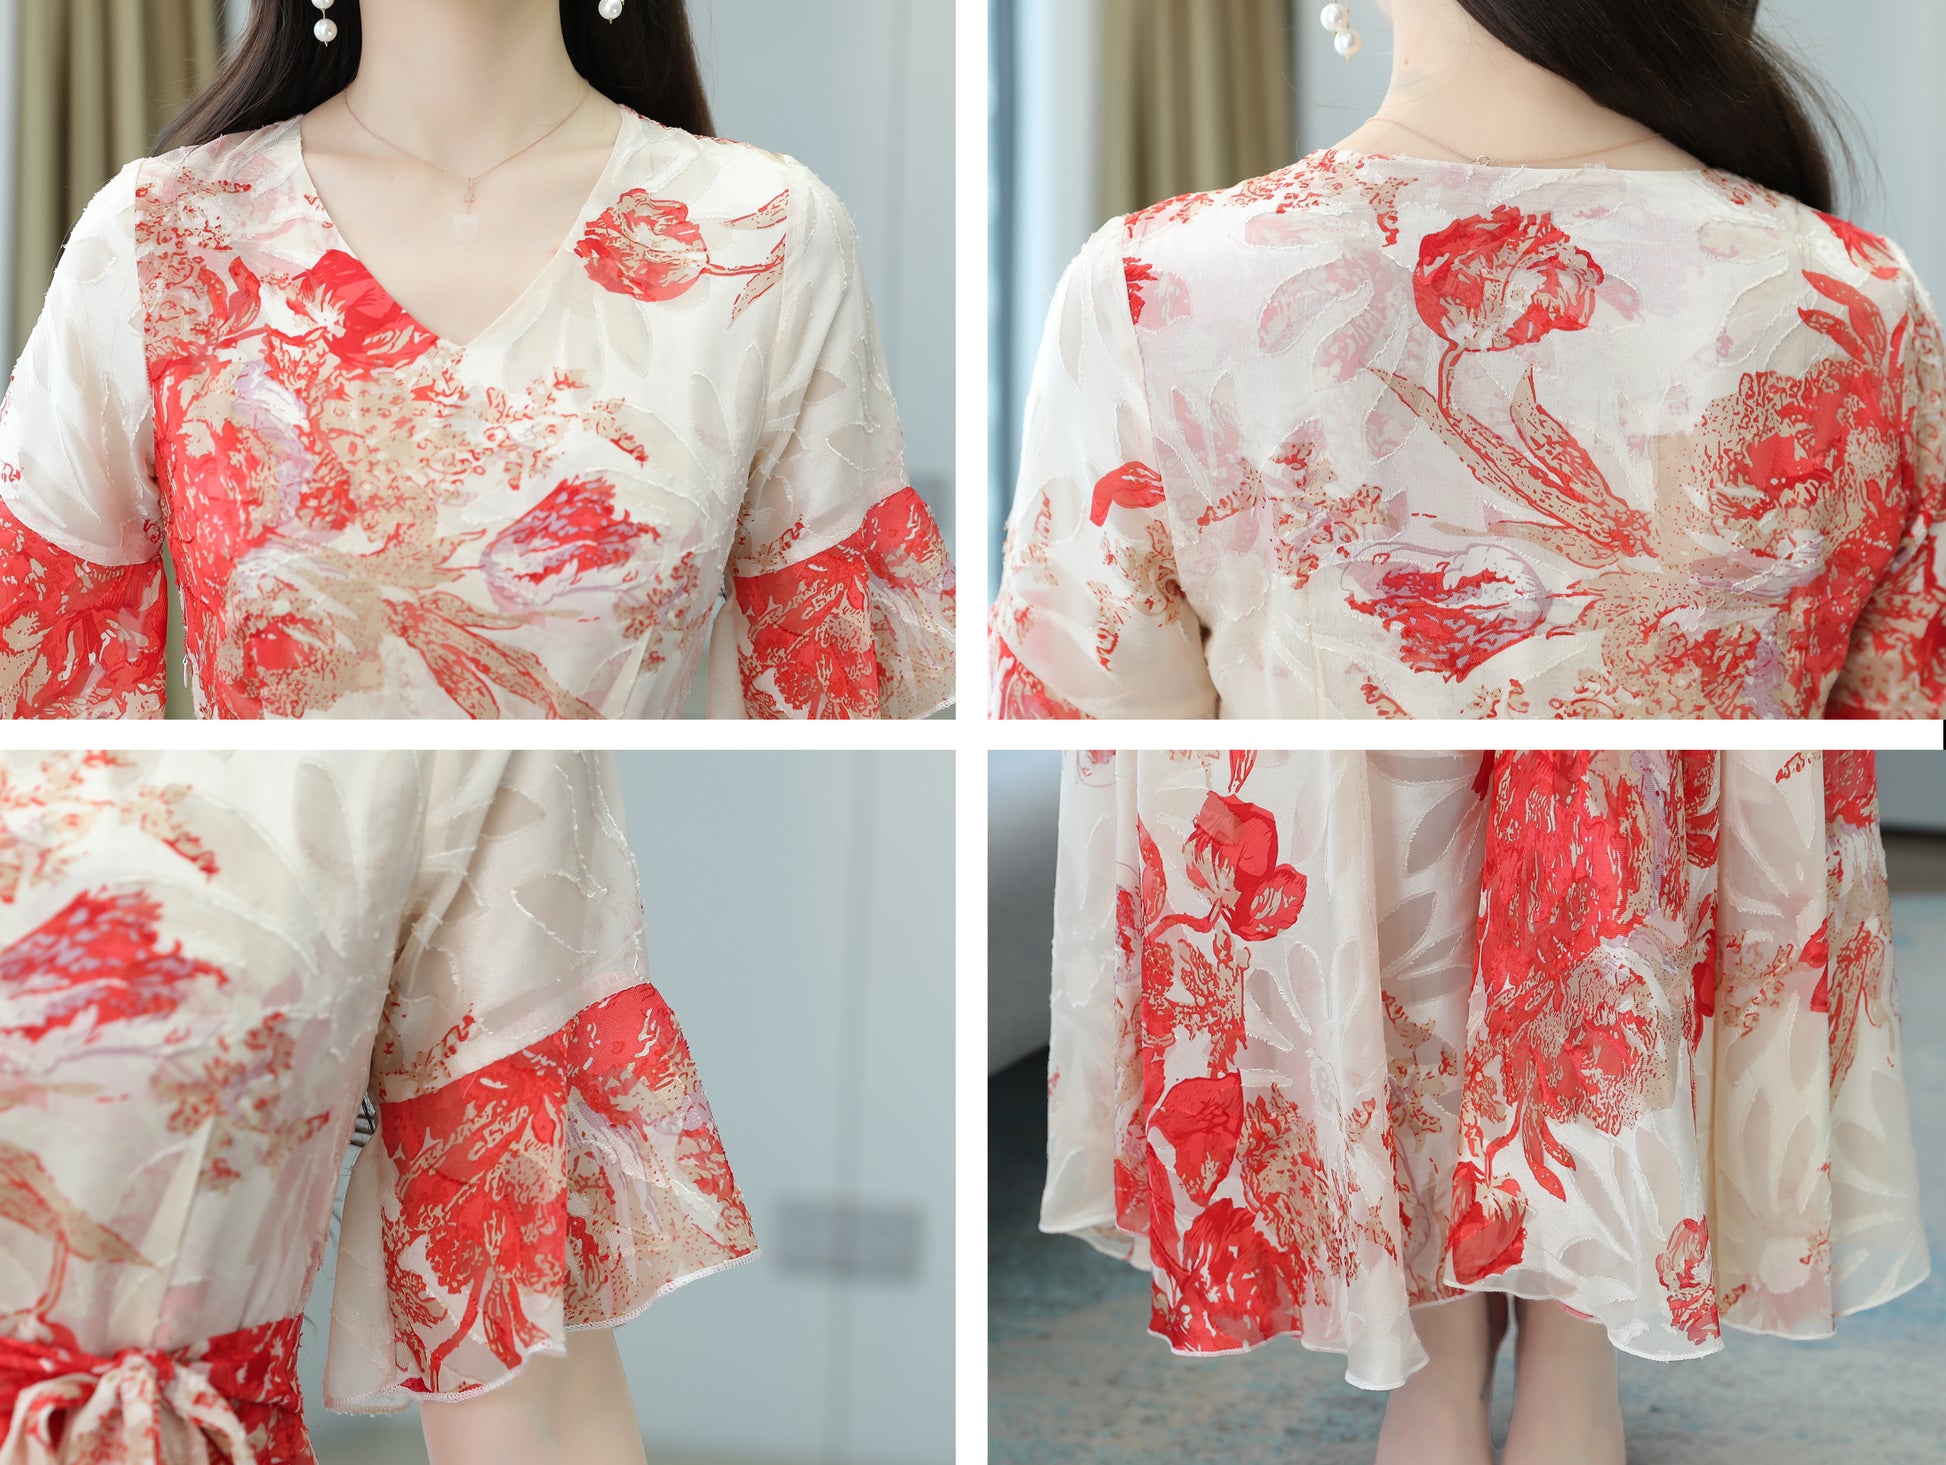 Classic White Dress Red Floral Pattern V-Neck Maxi Dress - LAI MENG FIVE CATS